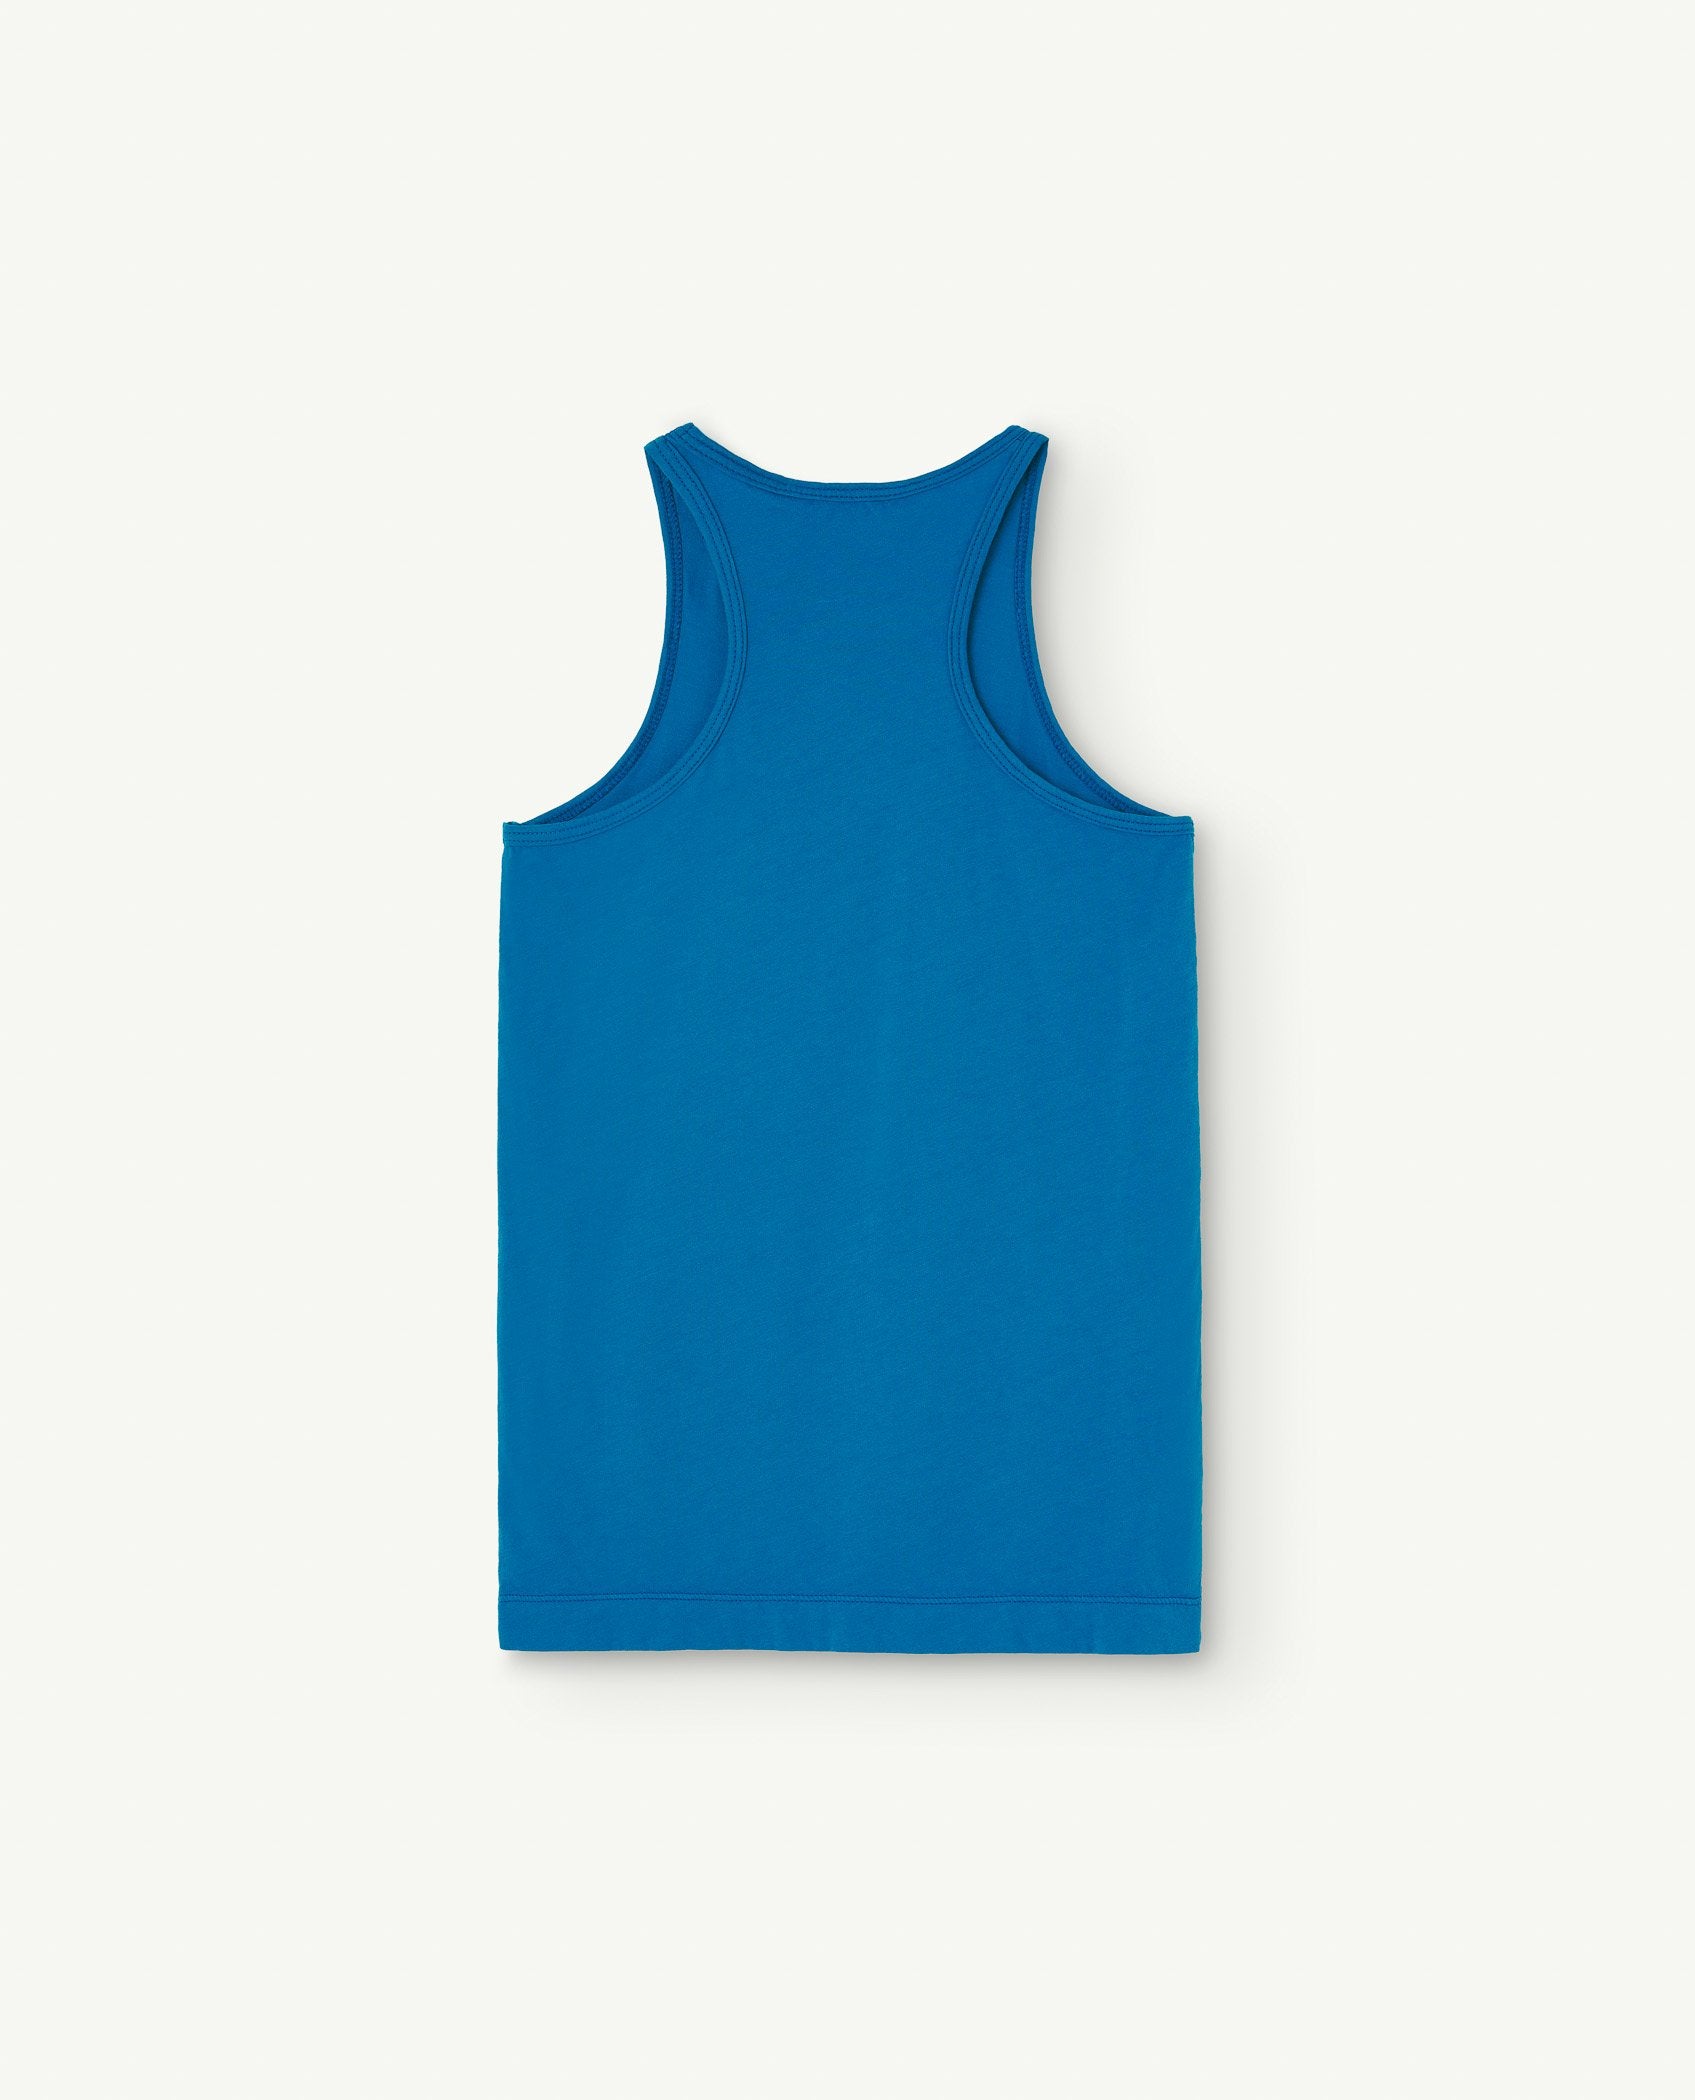 Blue Frog Tank Top PRODUCT BACK